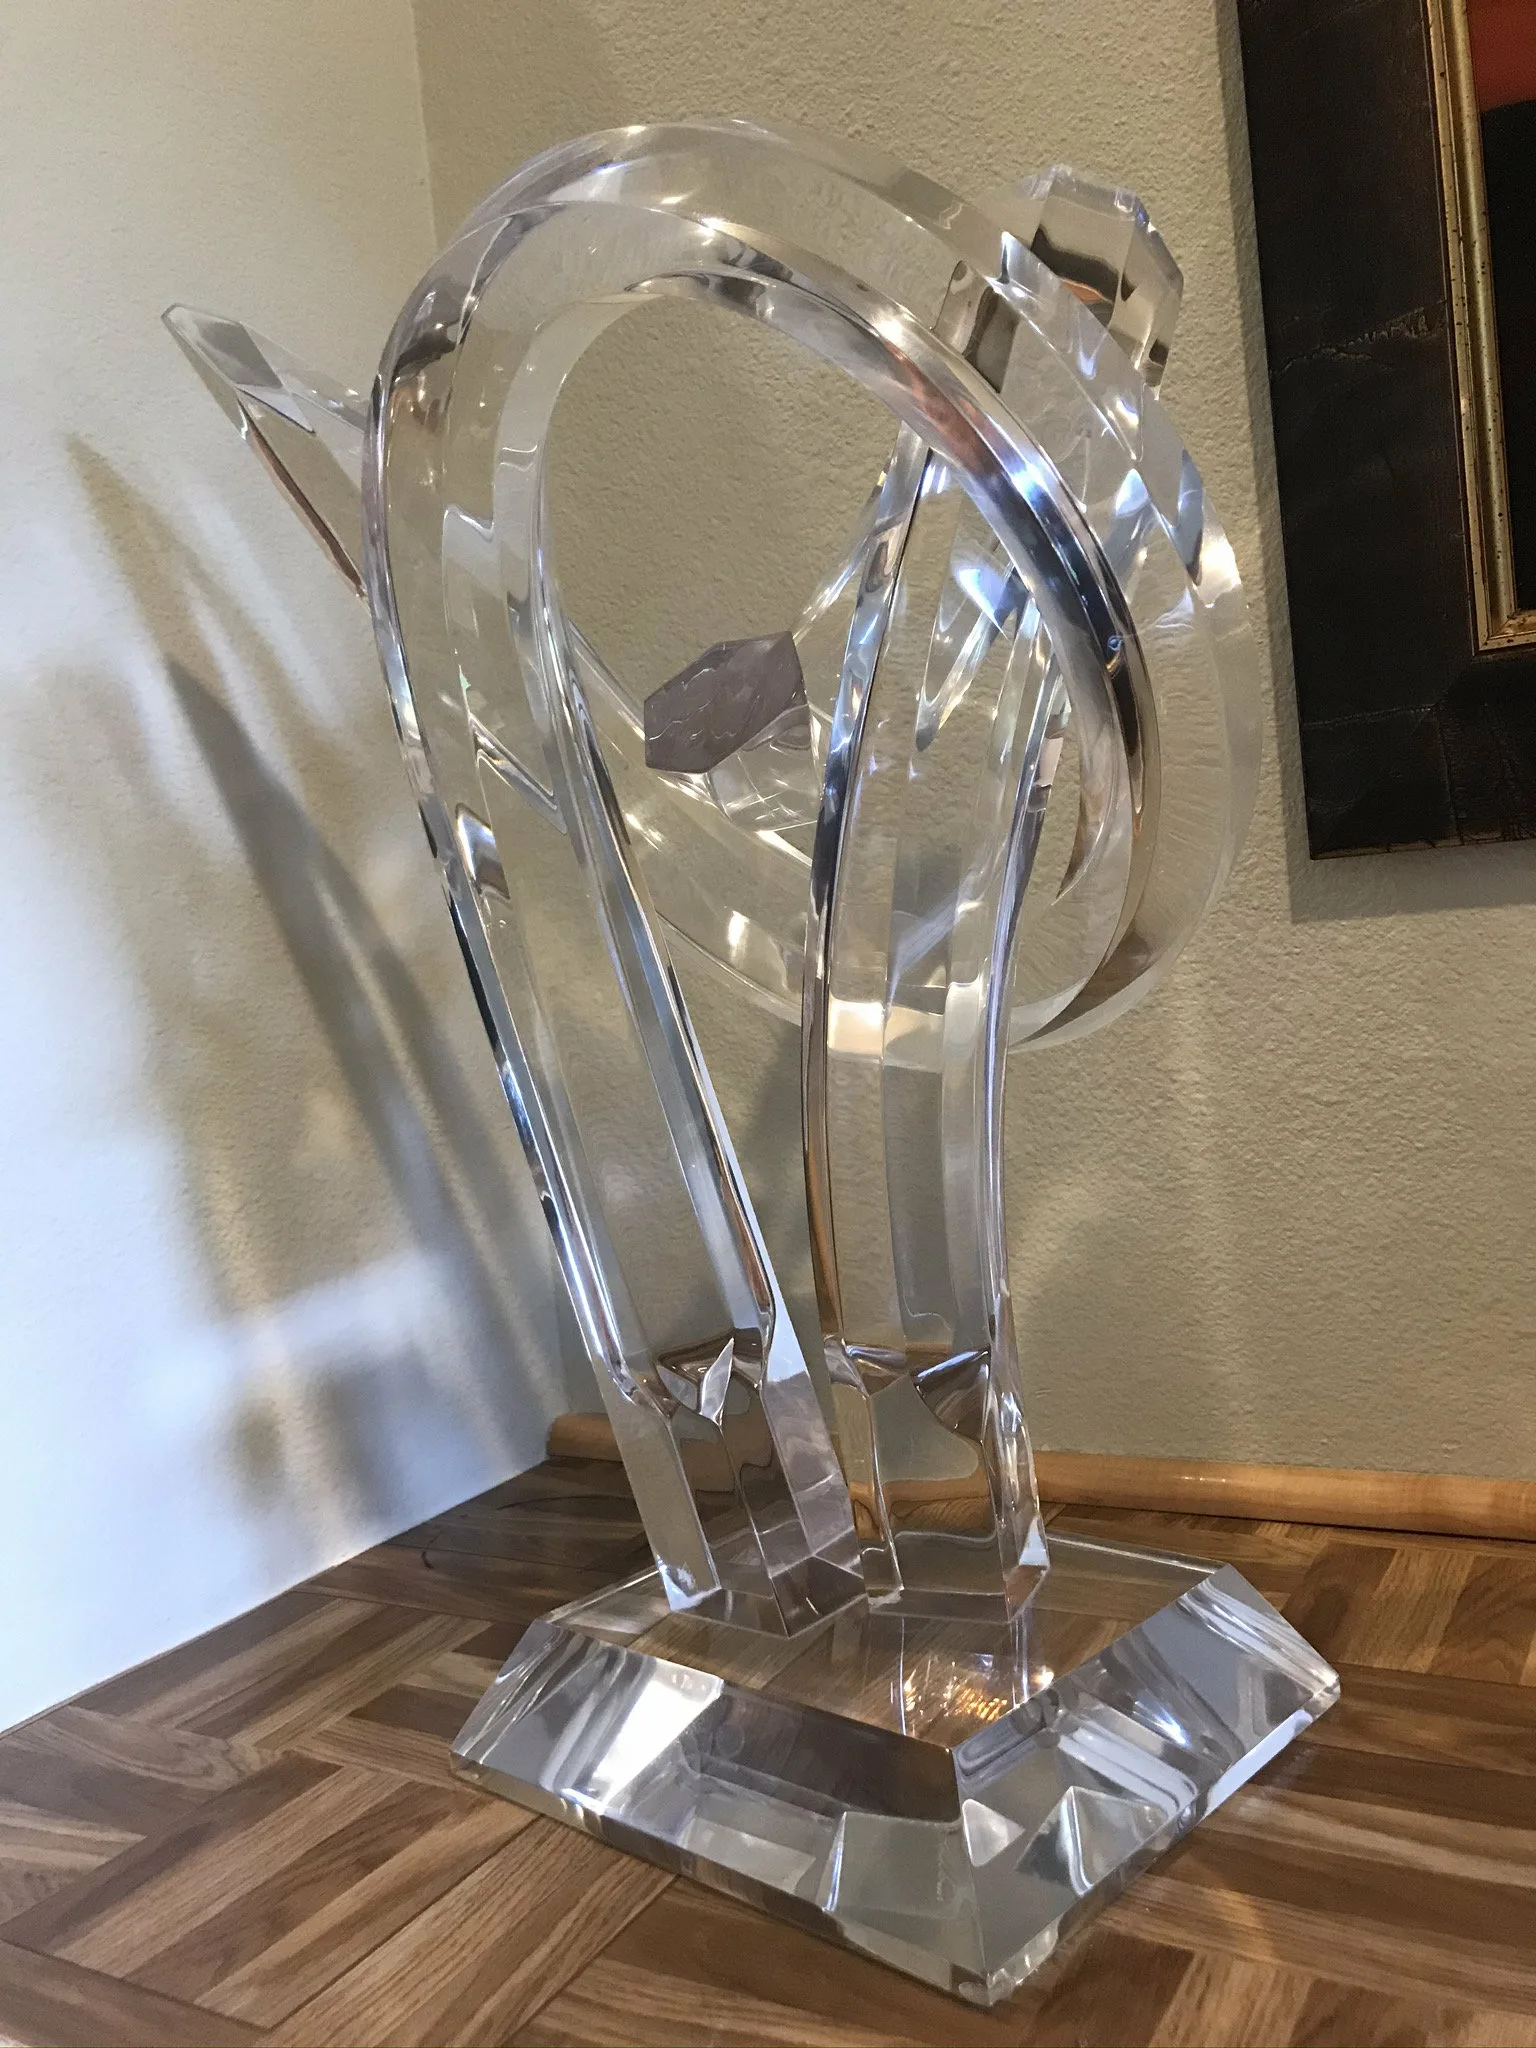 Sculpture Lucite Acrylic 21"H, Signed Haziza, Earliy work 1999